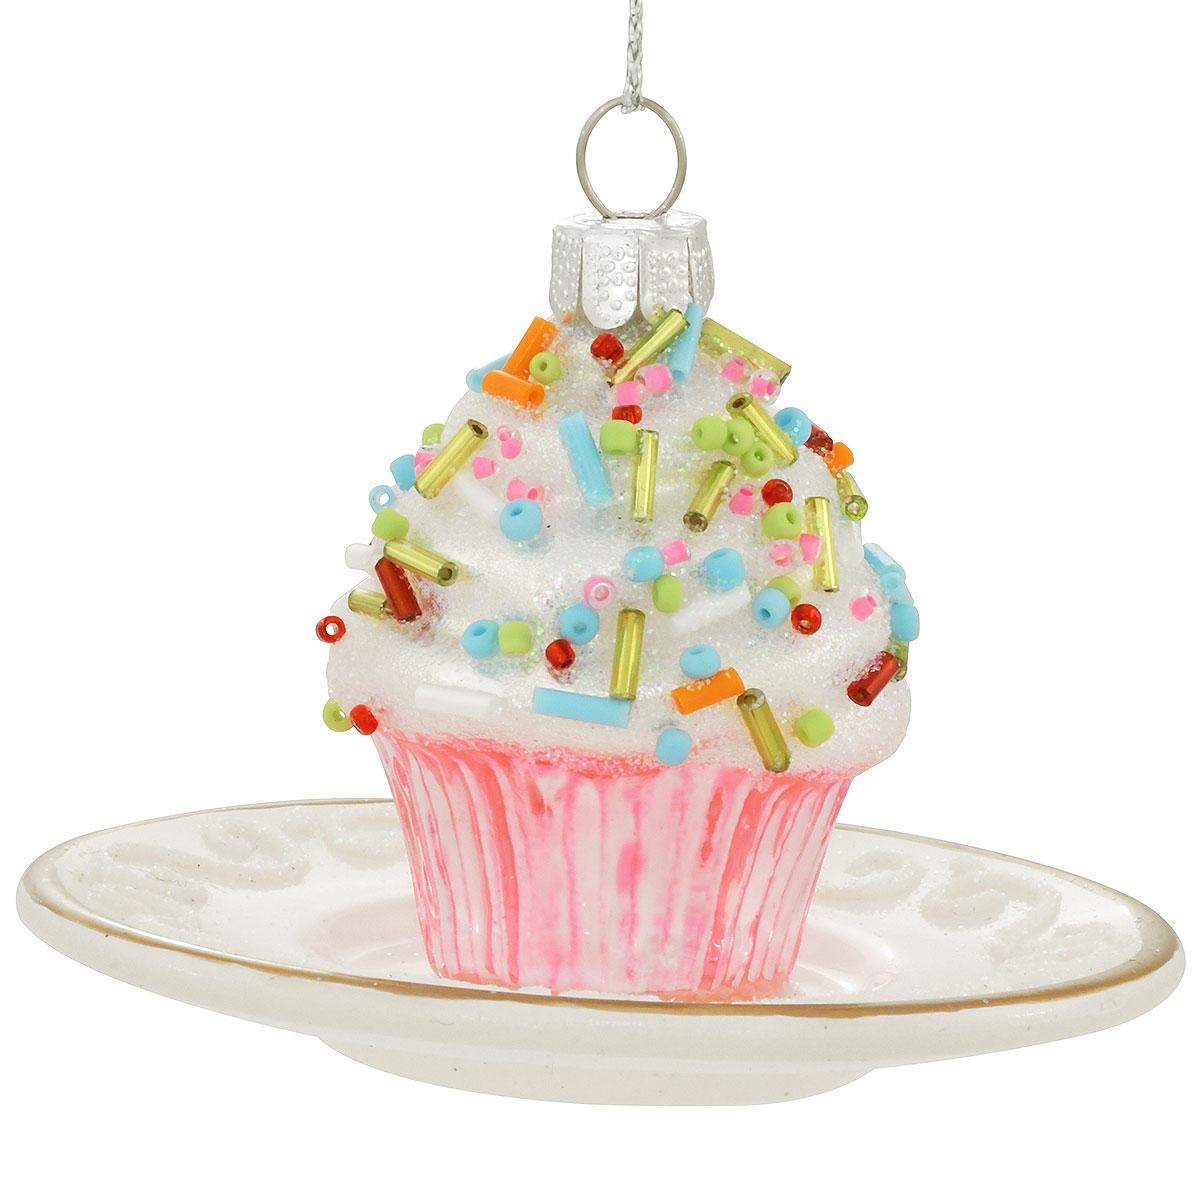 Cupcake On Plate Glass Ornament